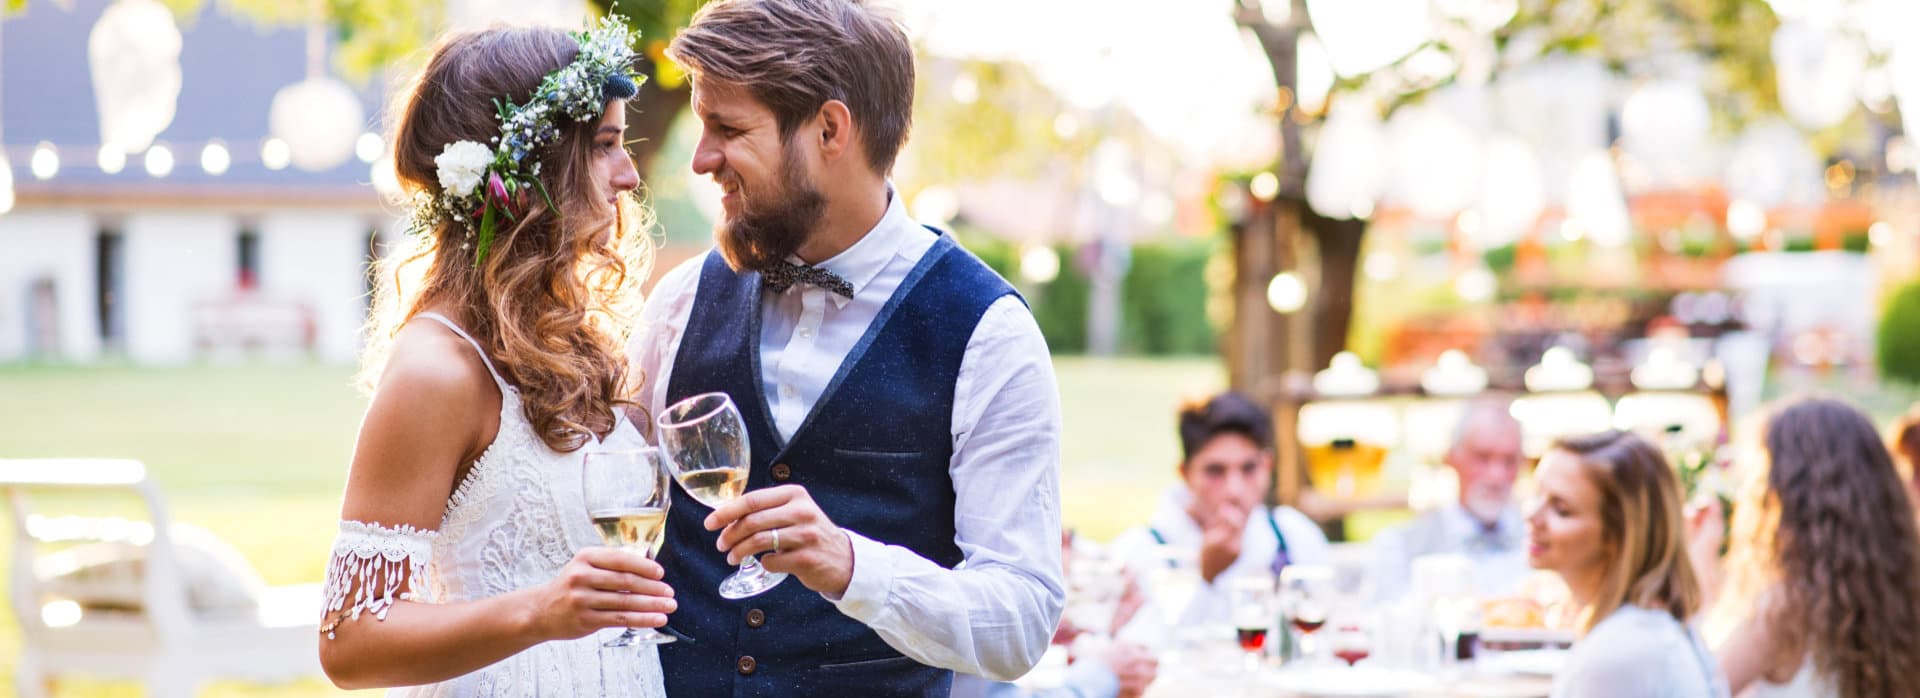 Bride and groom clinking glasses at wedding reception